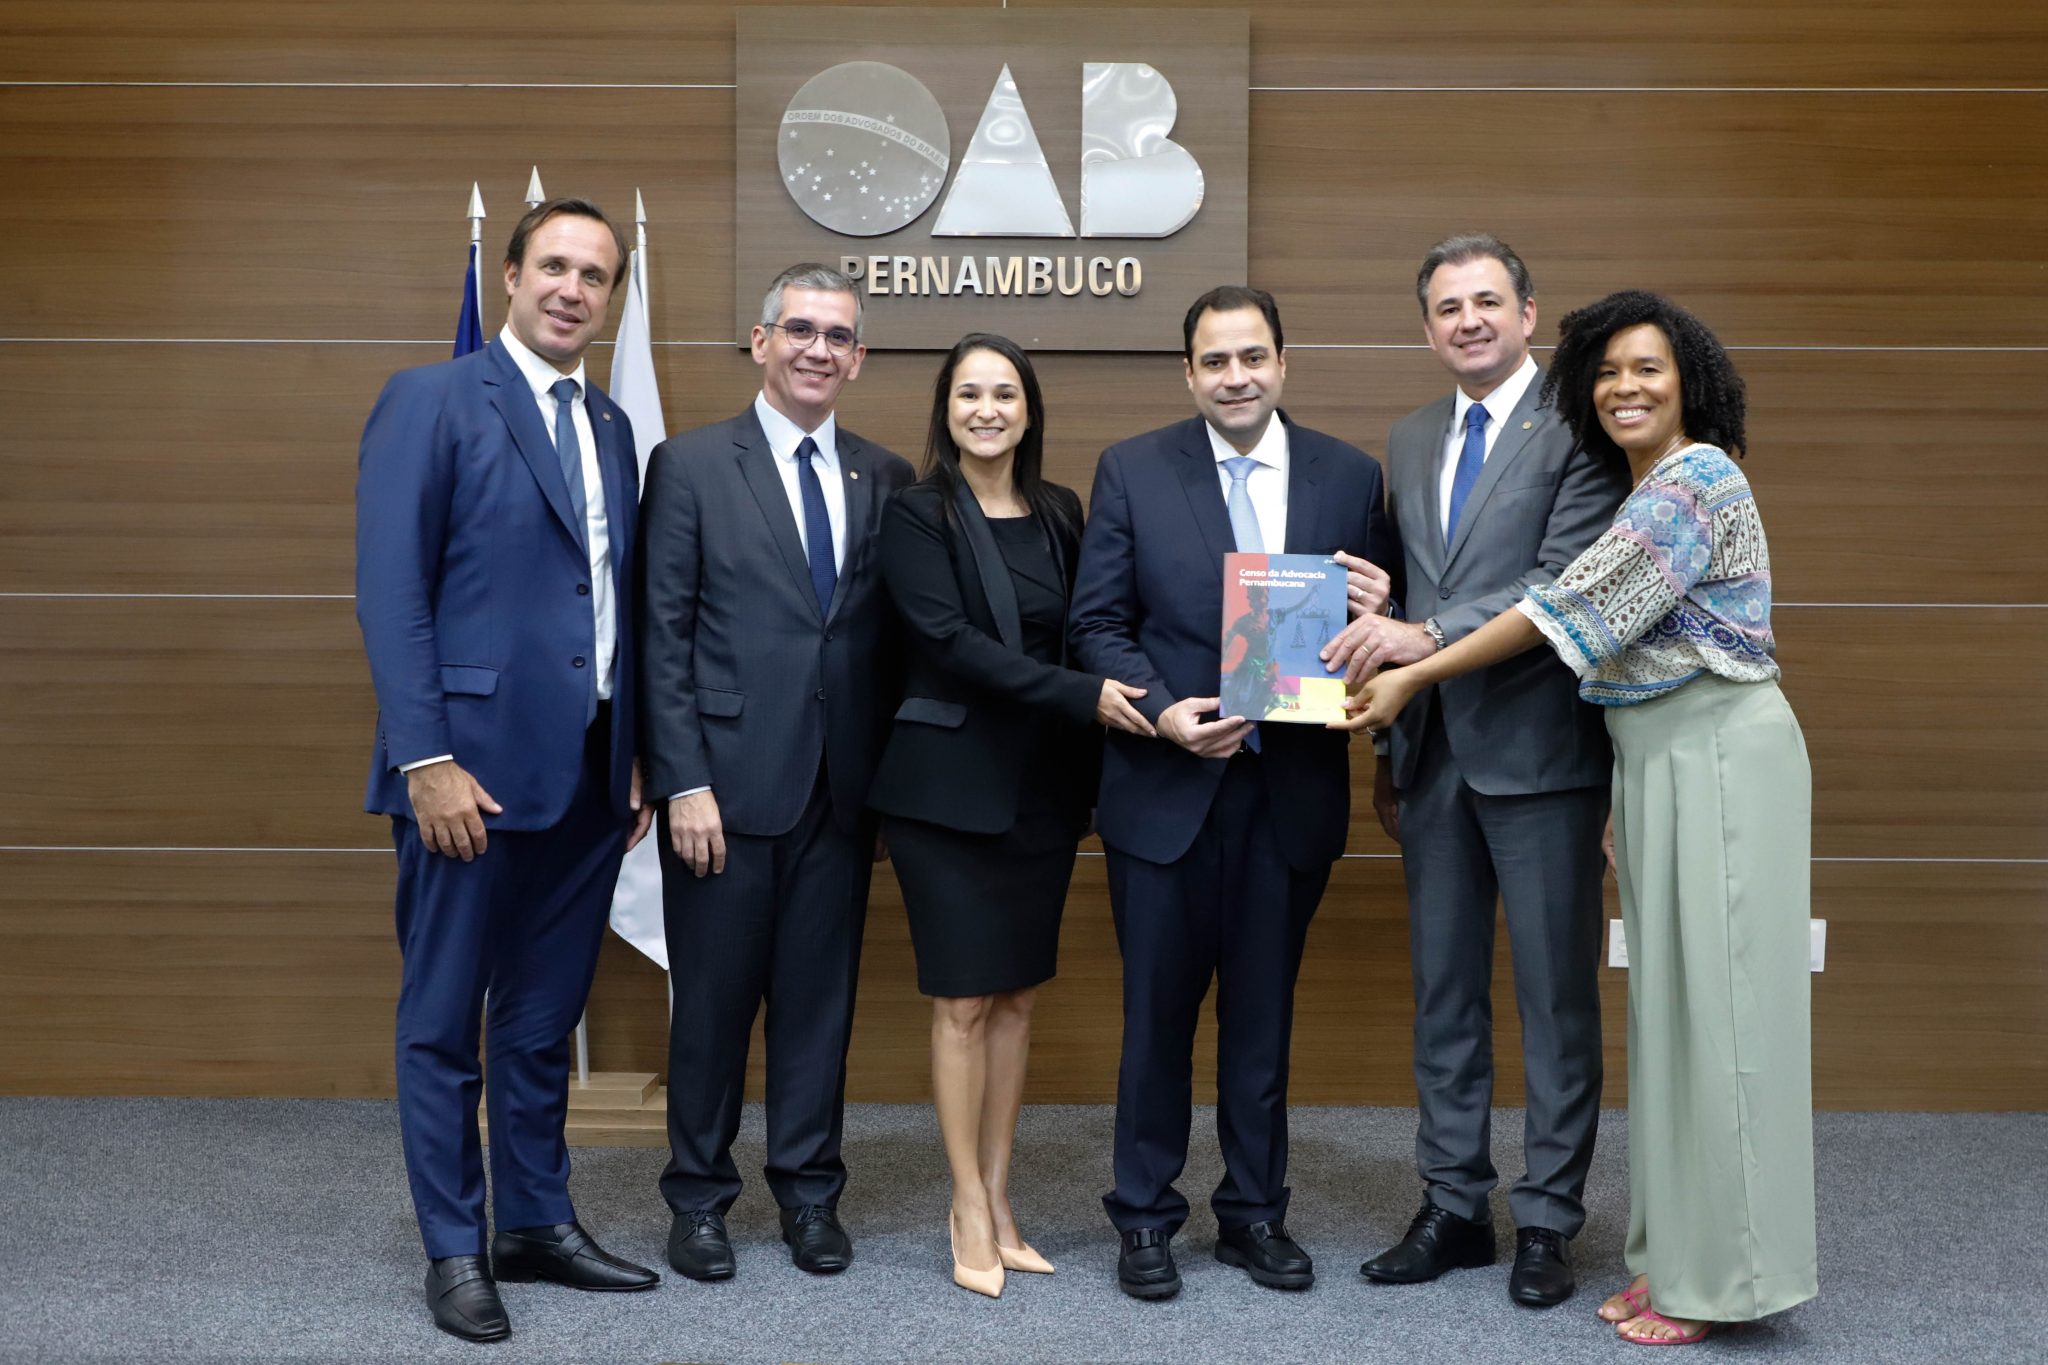 Investiture of the new board of OAB Pernambuco honors the entity’s 90th anniversary and launches unpublished census in the country | oxy.social Inteligência Social para o Desenvolvimento Sustentável